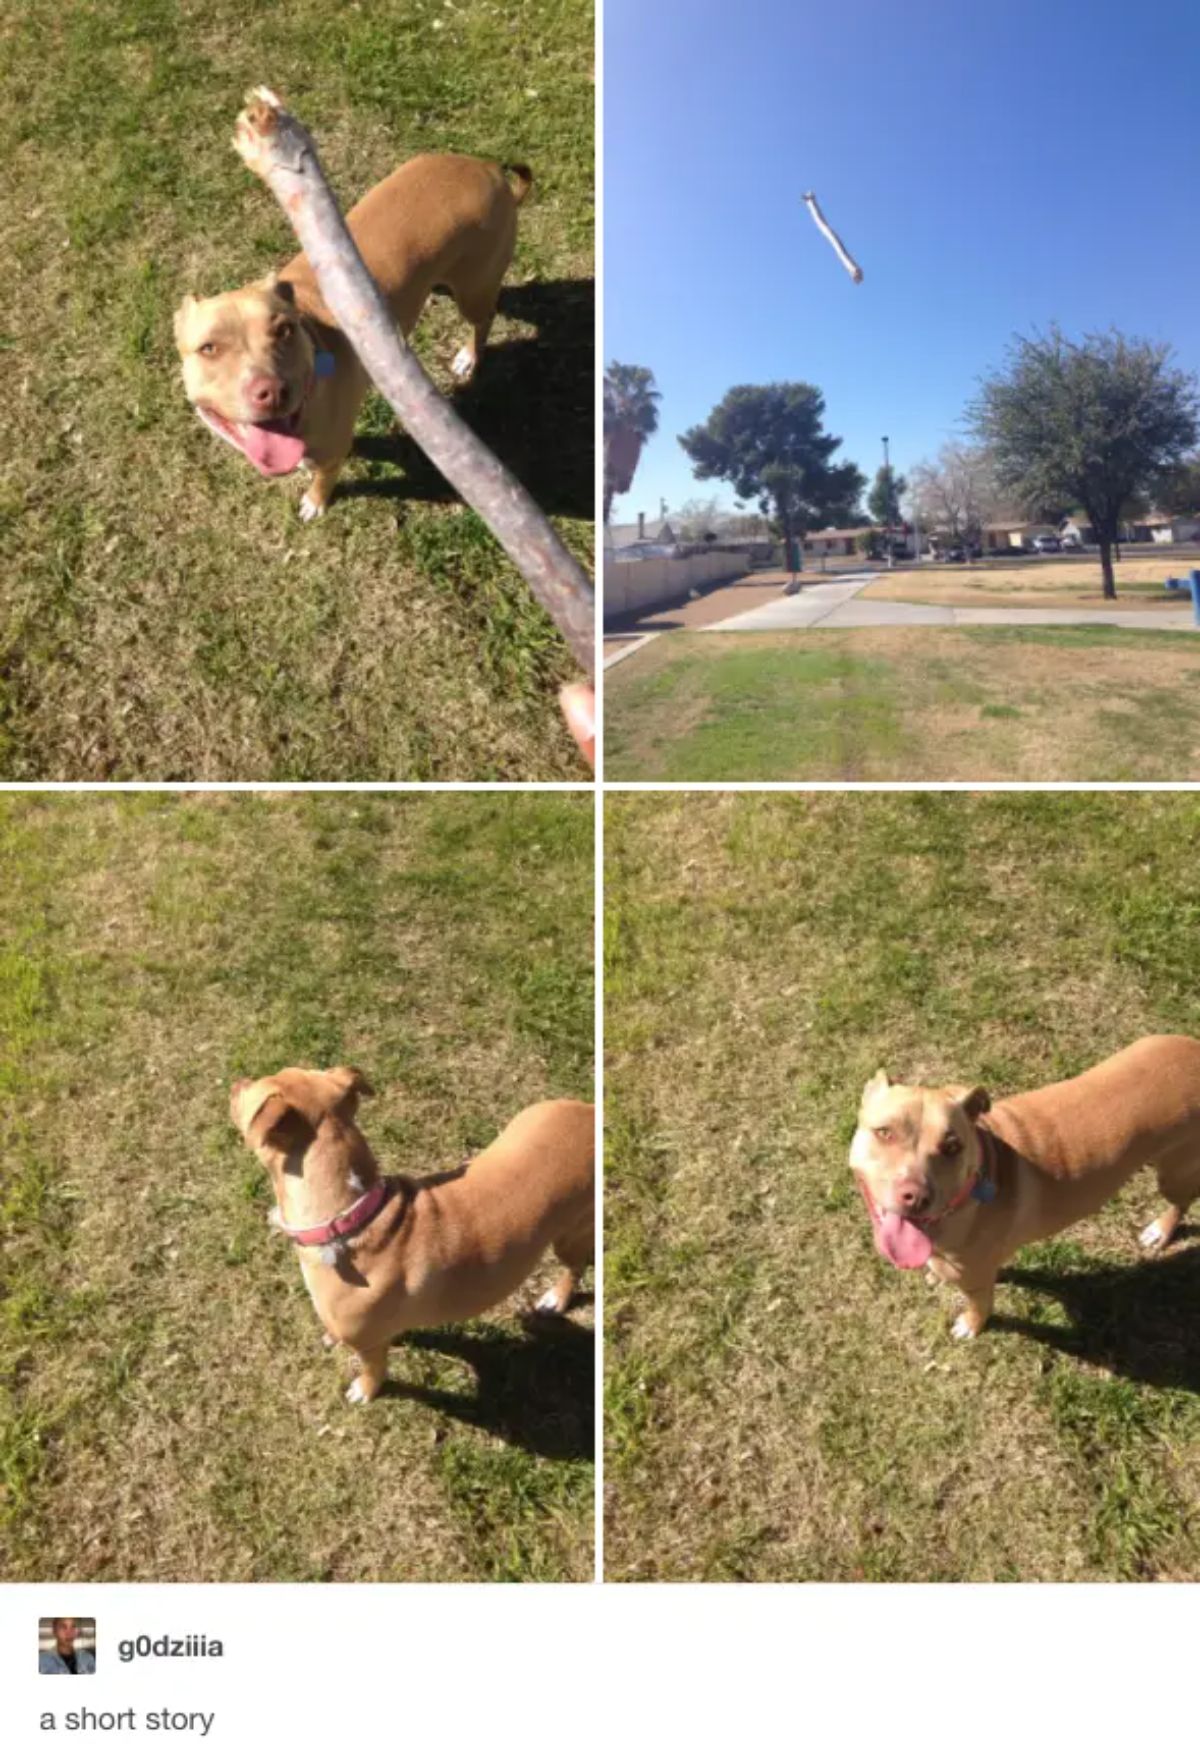 4 photos of a stick being thrown for a brown pitbull and the dog hasn't run to get it